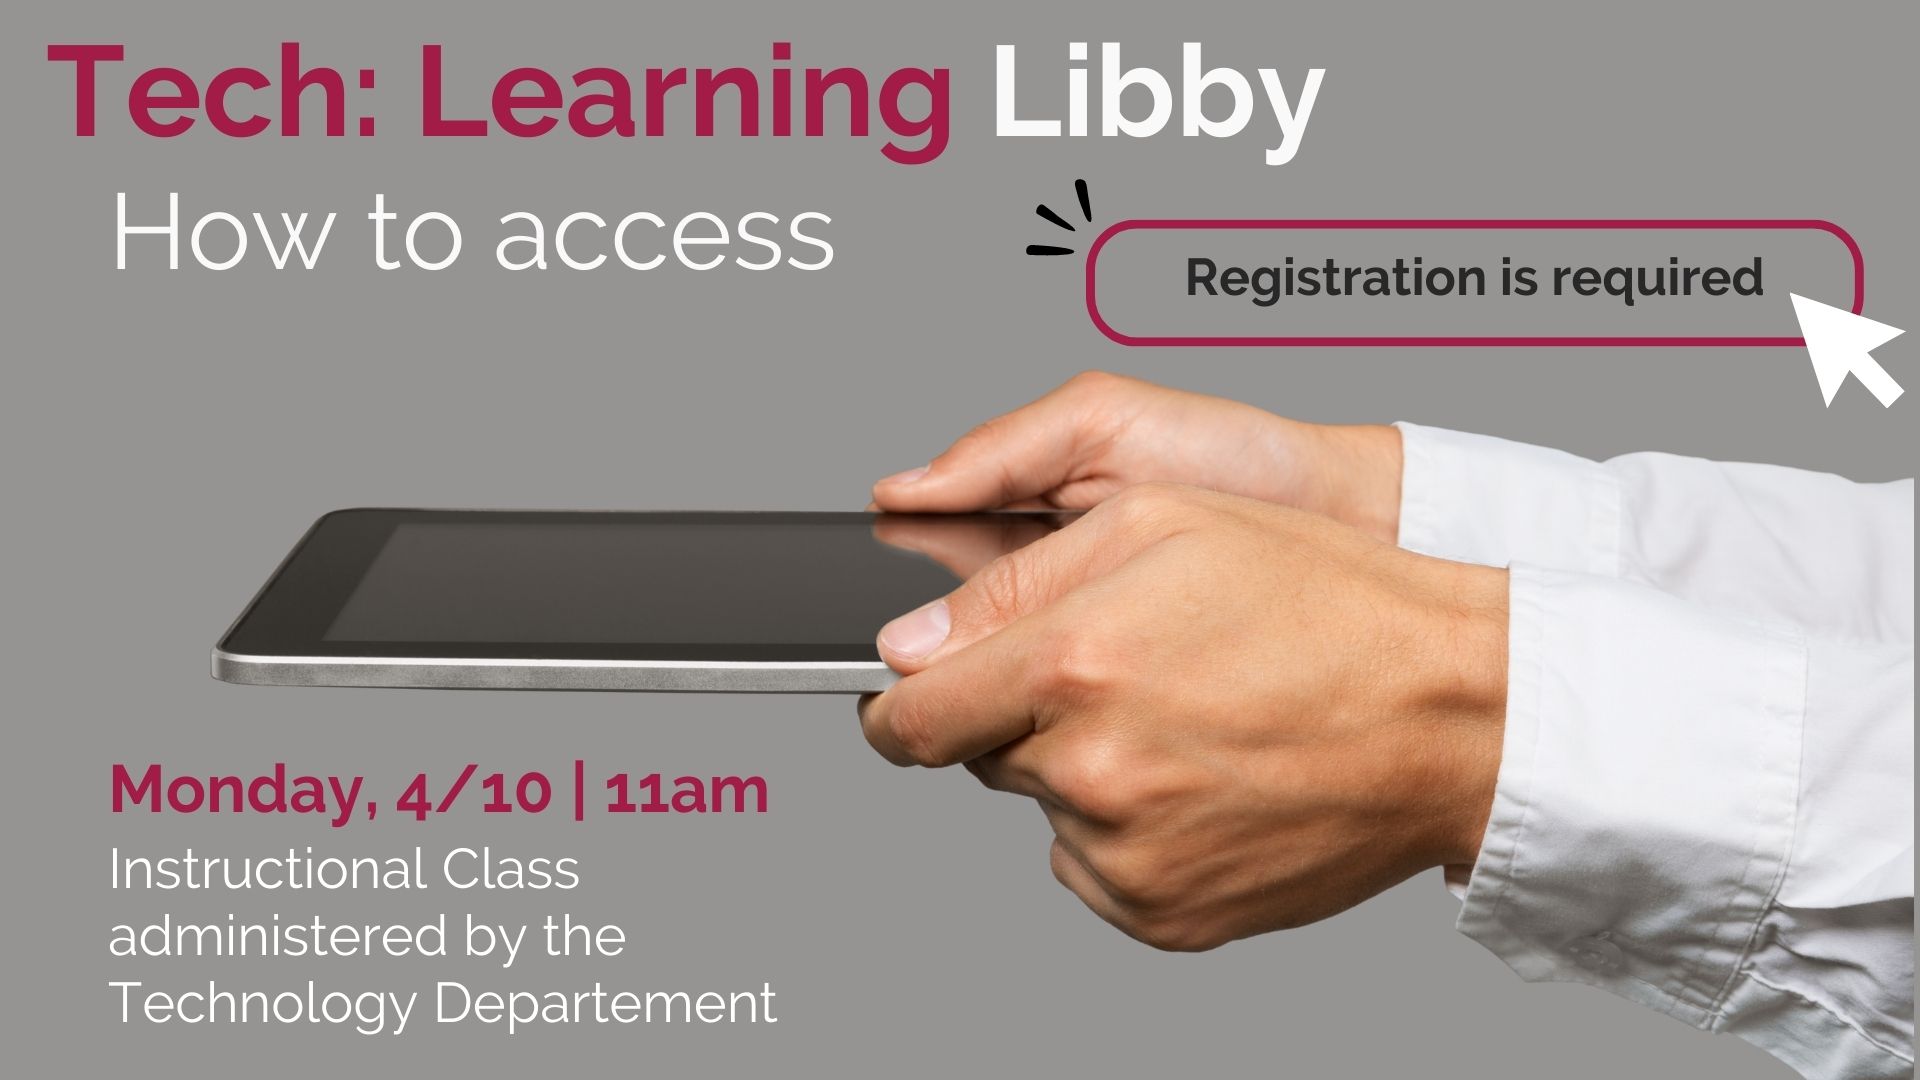 How to access Libby tech class